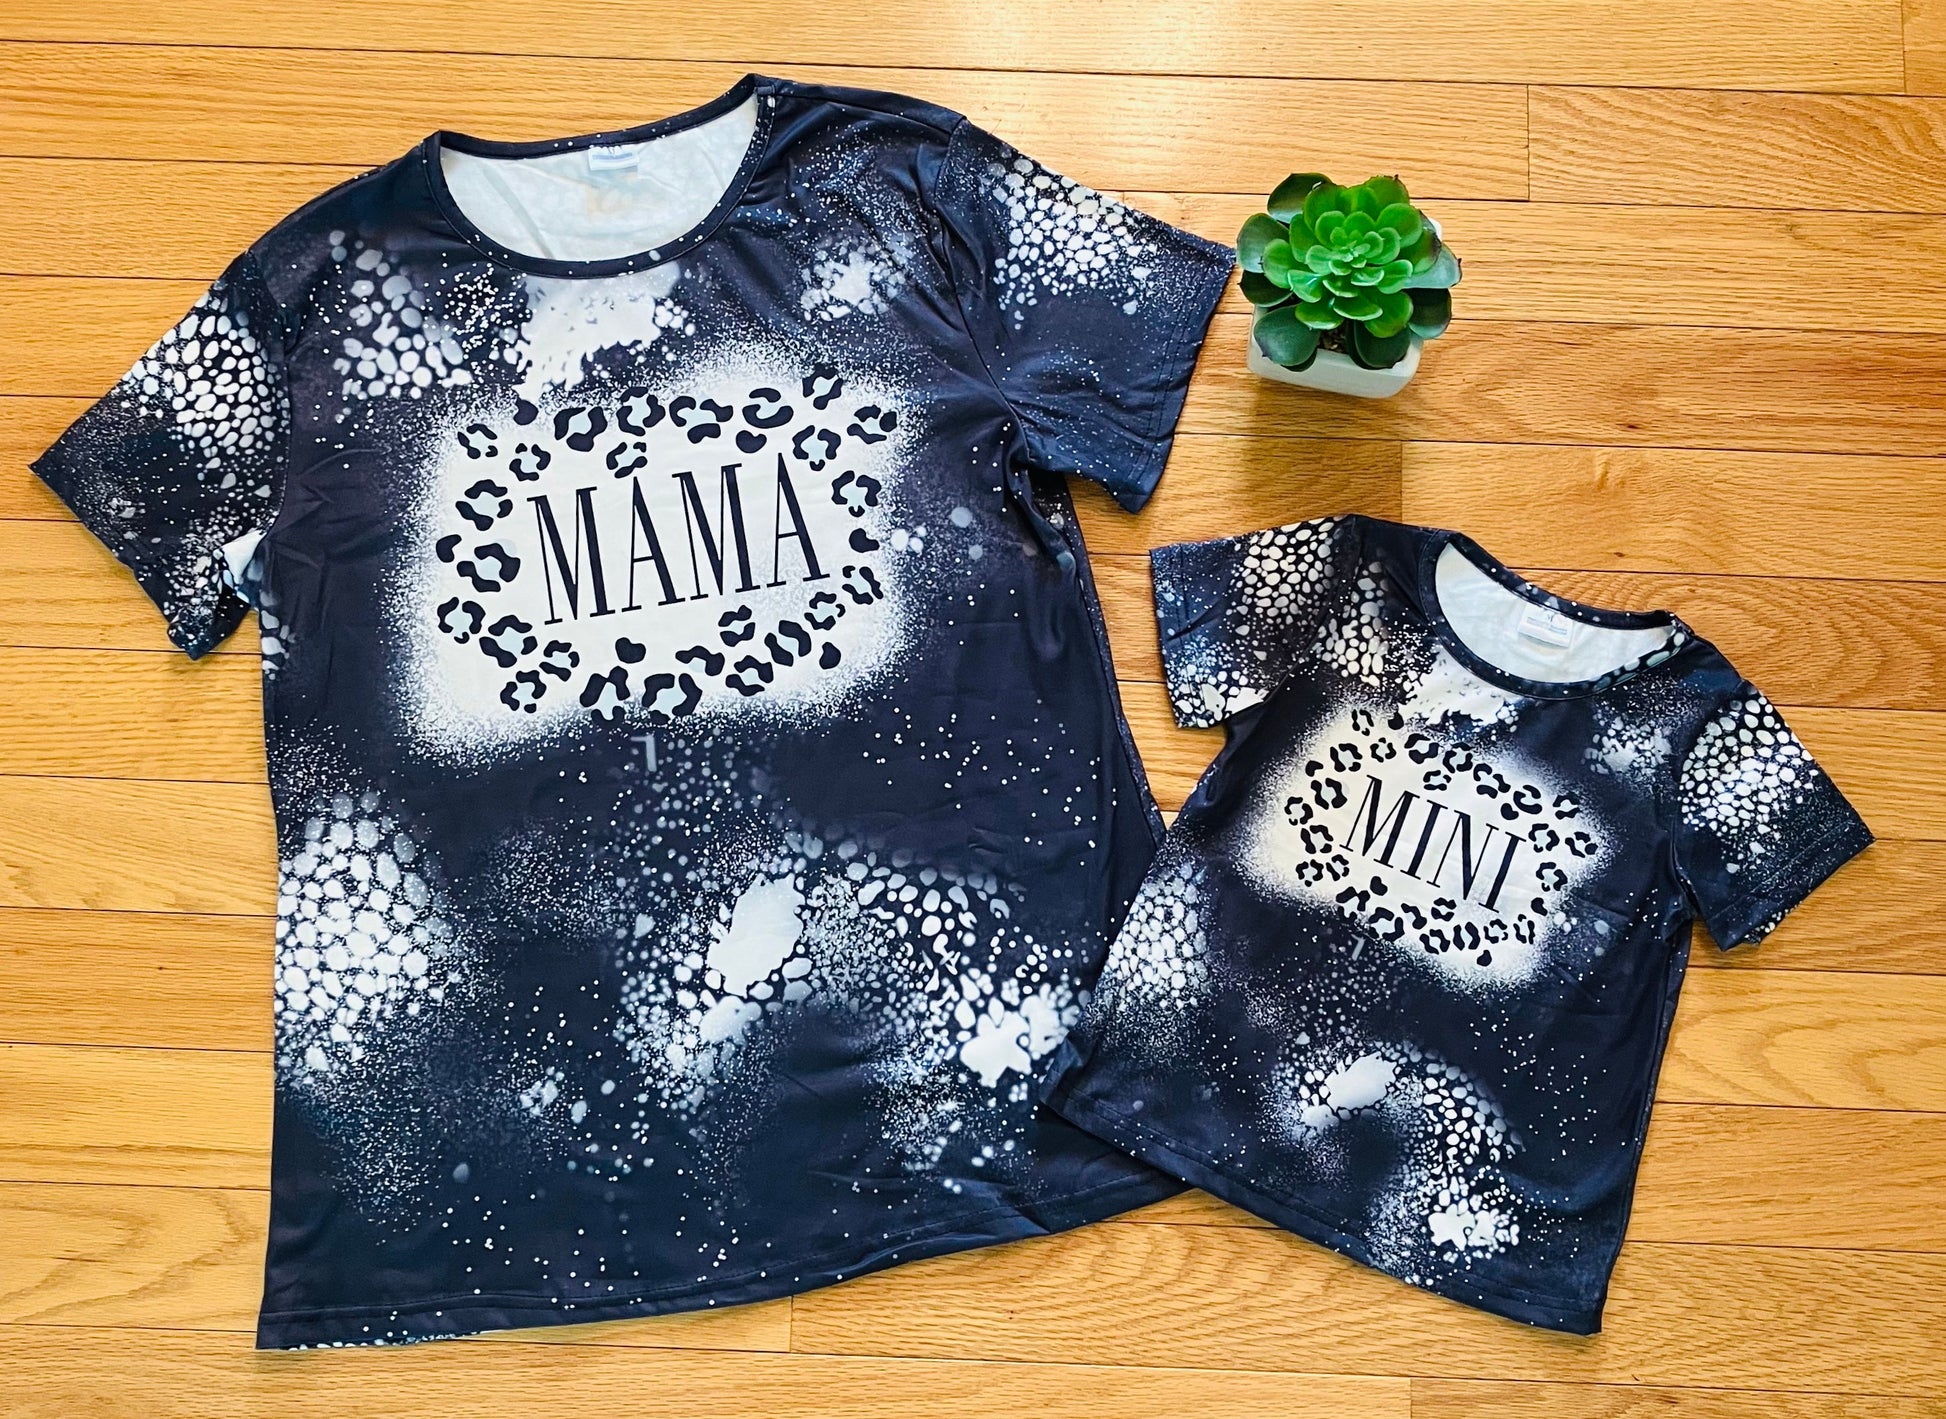 Mommy and Me Cheetah Printed Mama & Mini Matching Tops Tops MomMe and More 